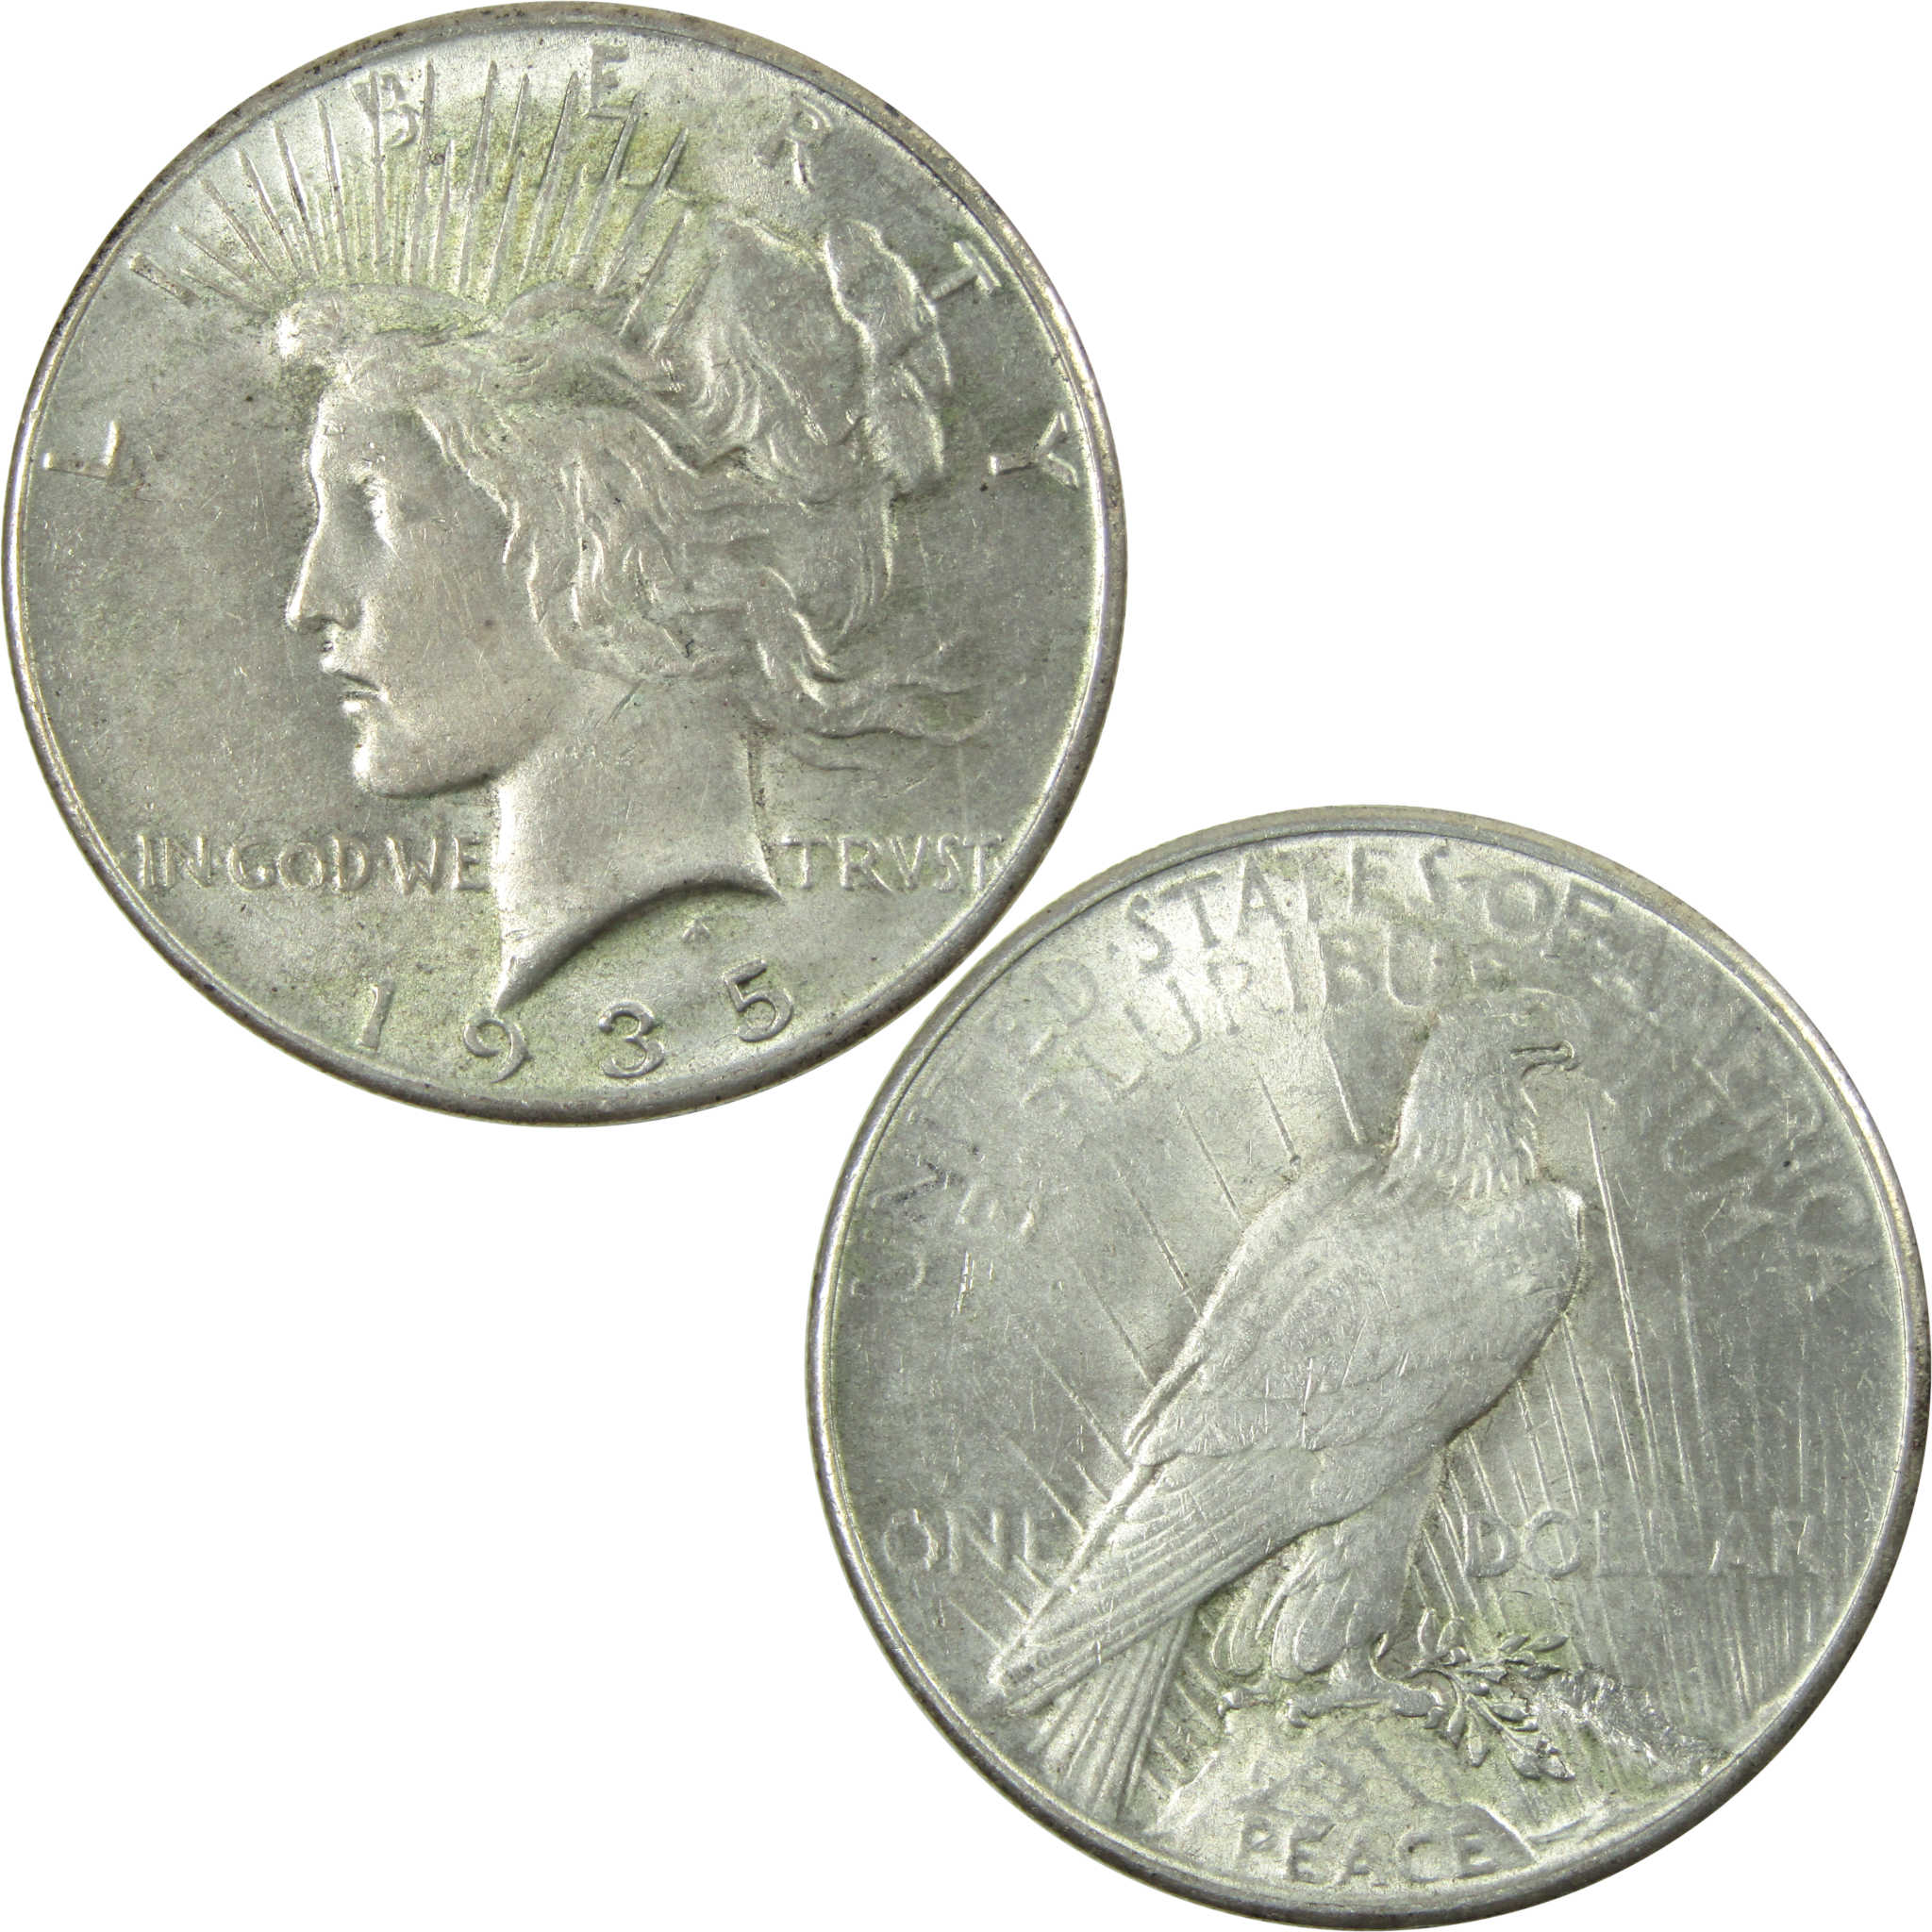 1935 Peace Dollar AU About Uncirculated Silver $1 Coin SKU:I13693